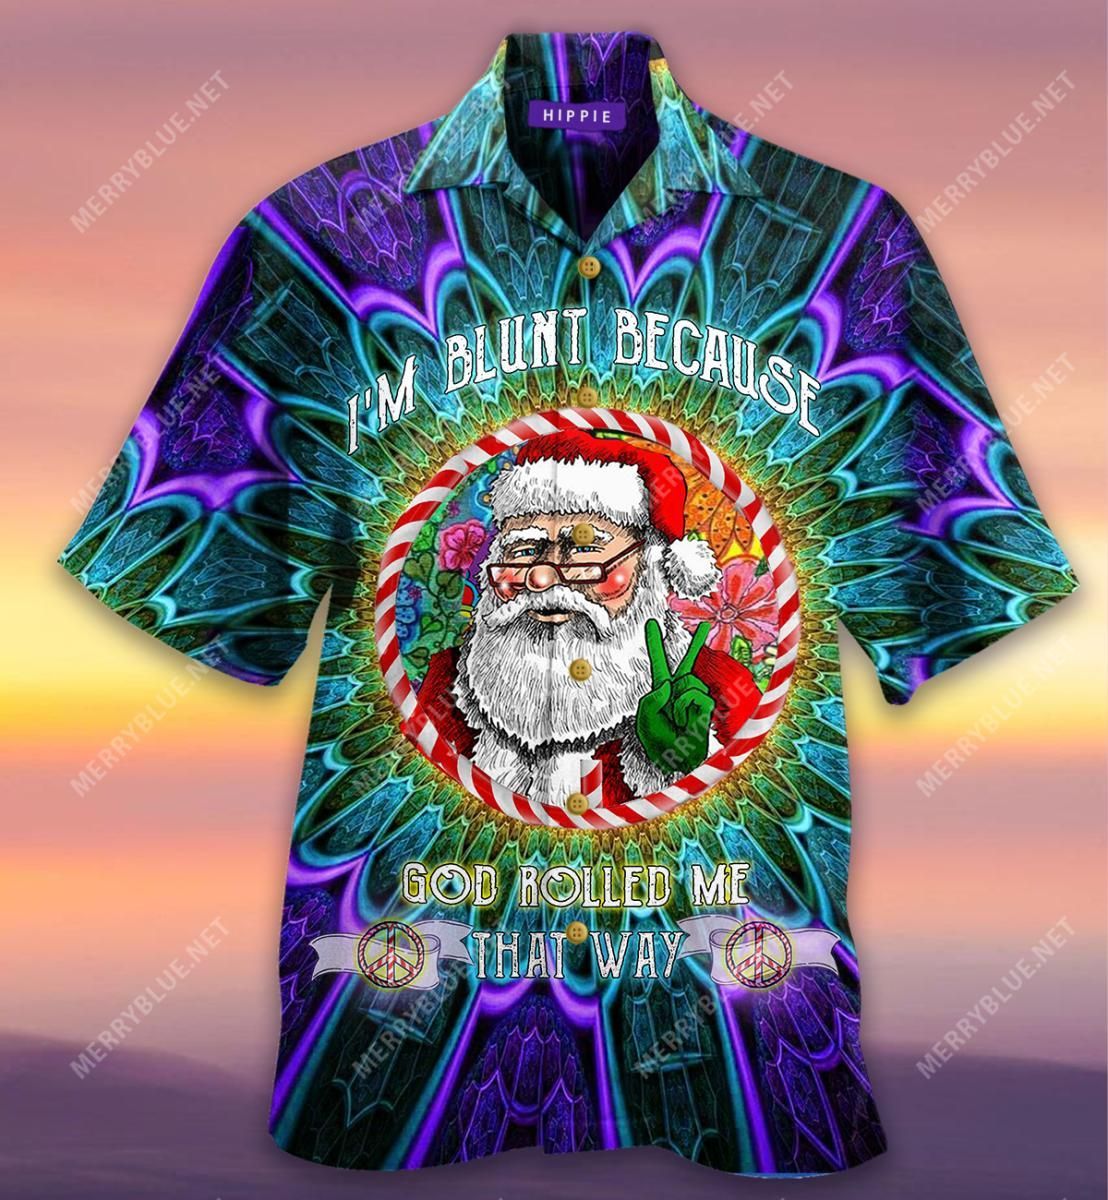 I'M Blunt Because God Rolled Me That Way Aloha Hawaiian Shirt Colorful Short Sleeve Summer Beach Casual Shirt For Men And Women